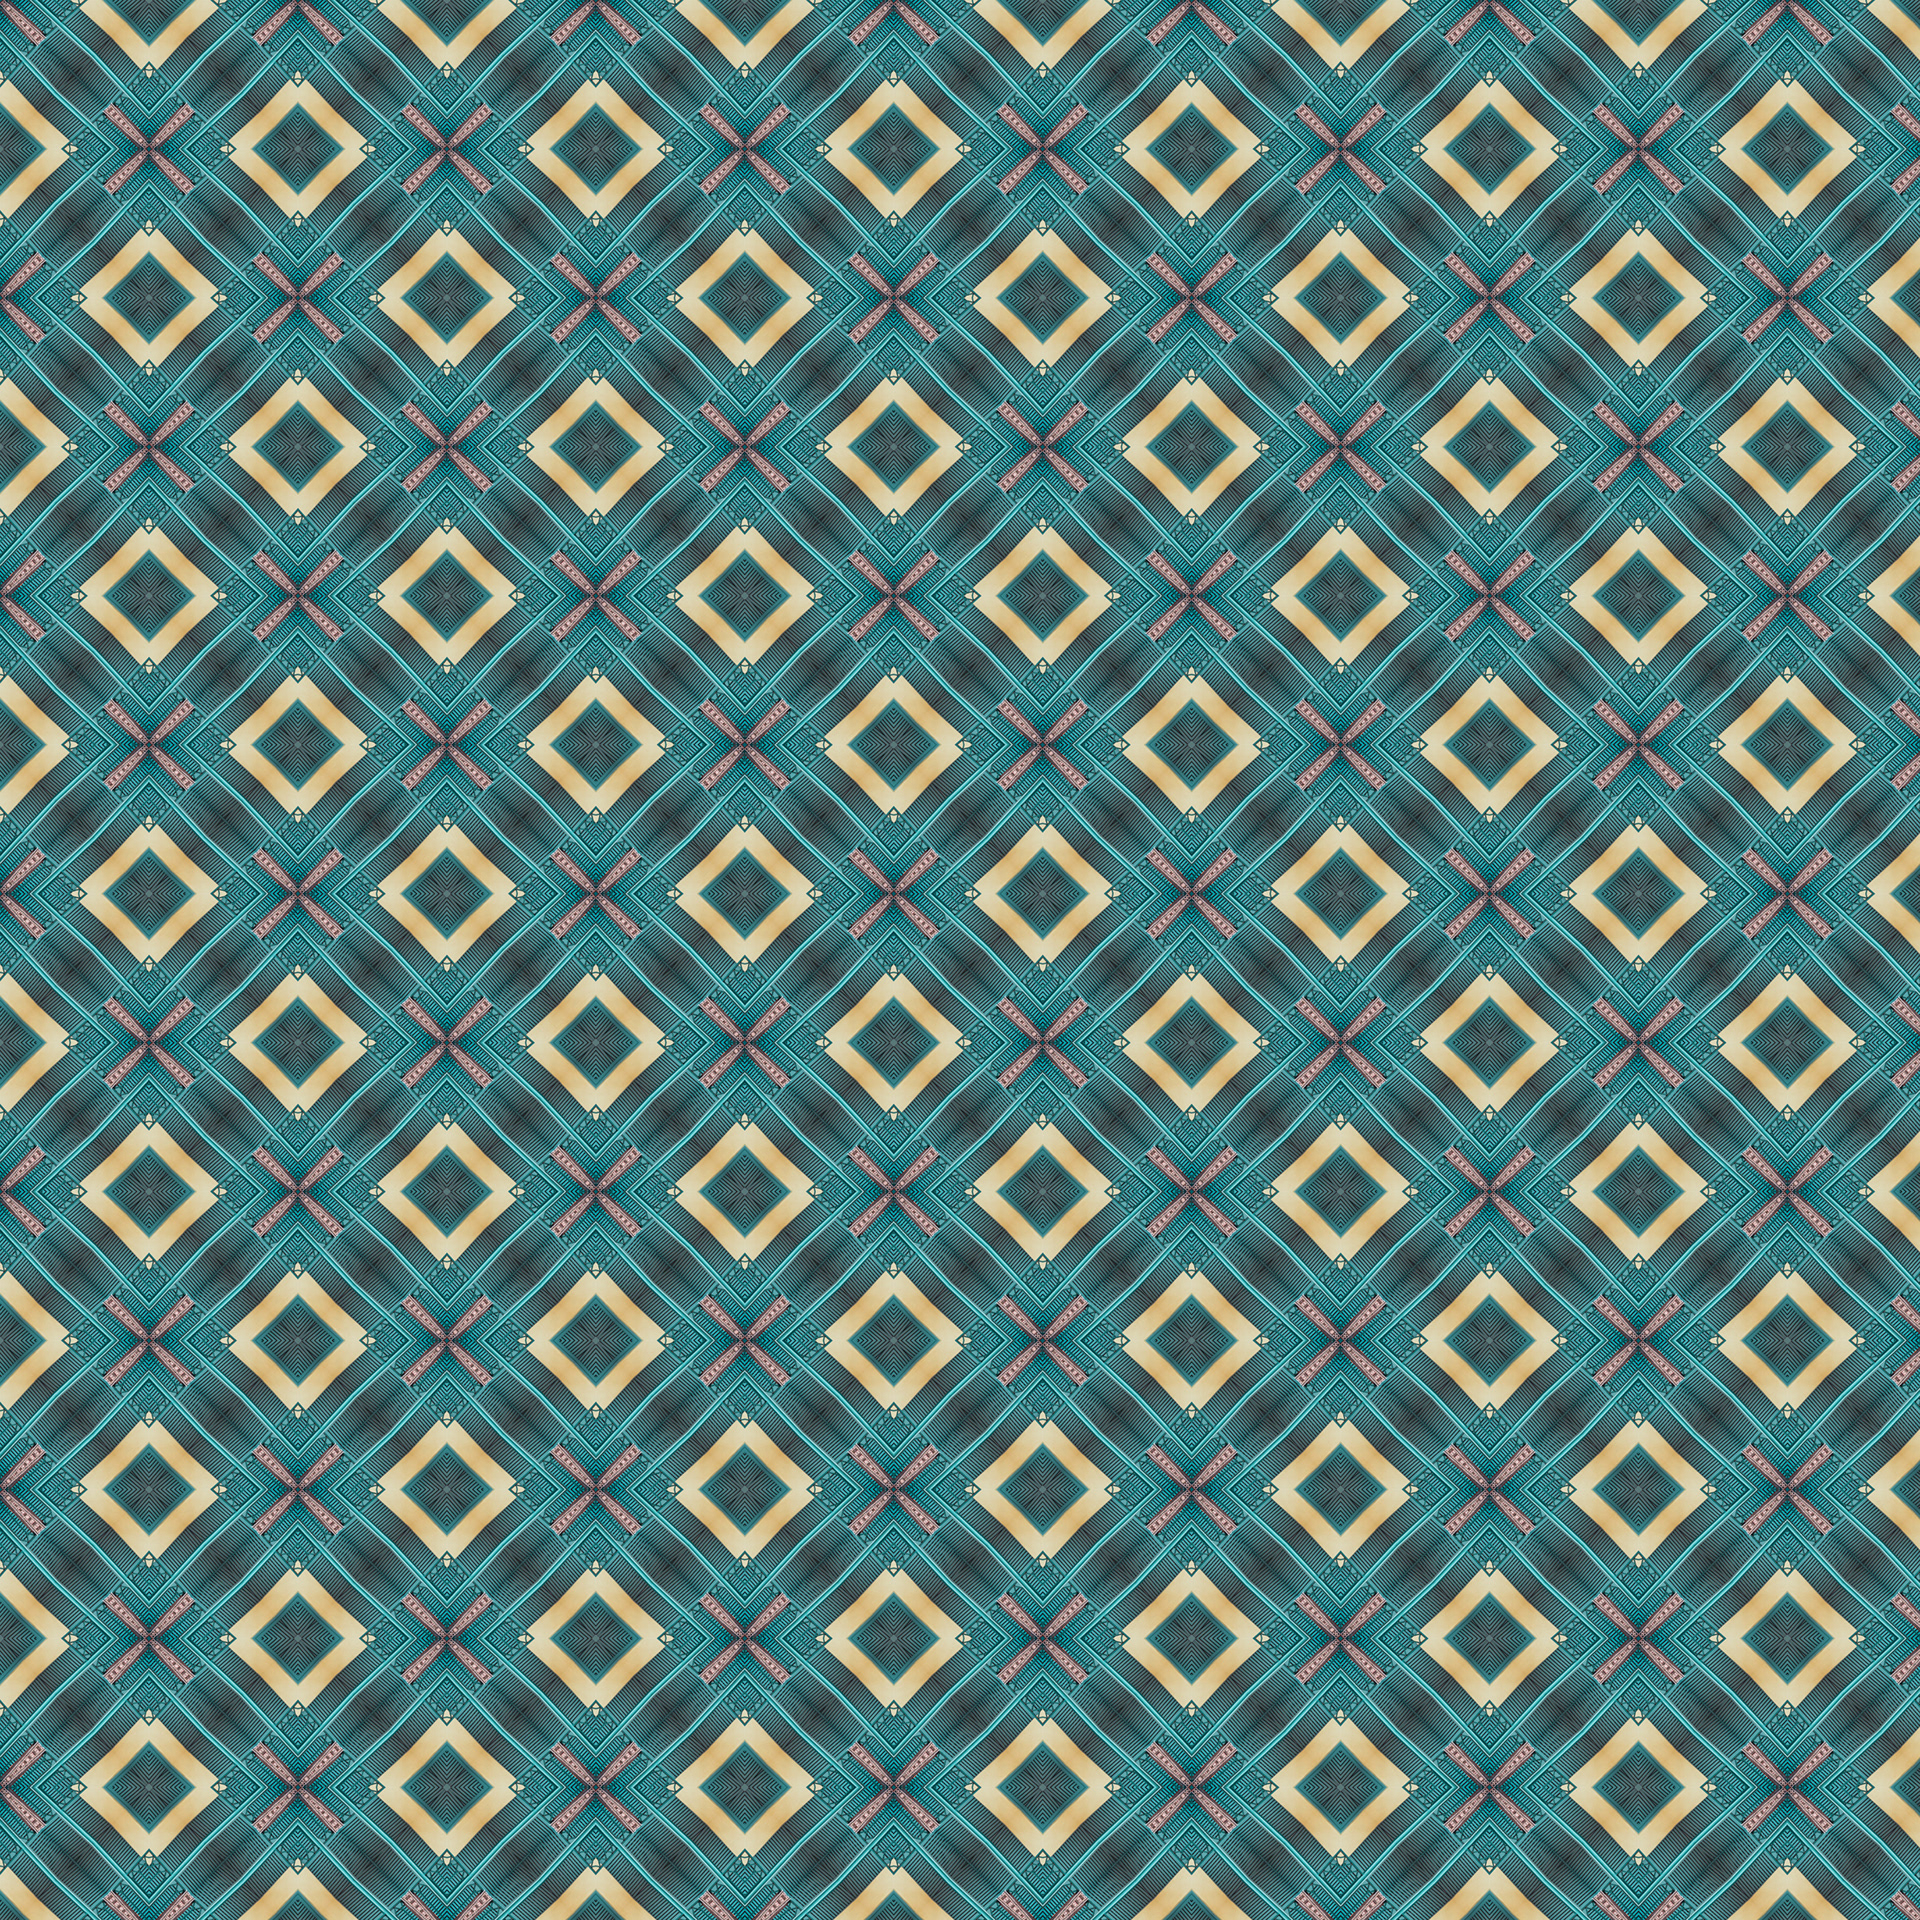 General 1920x1920 abstract pattern geometry fractal